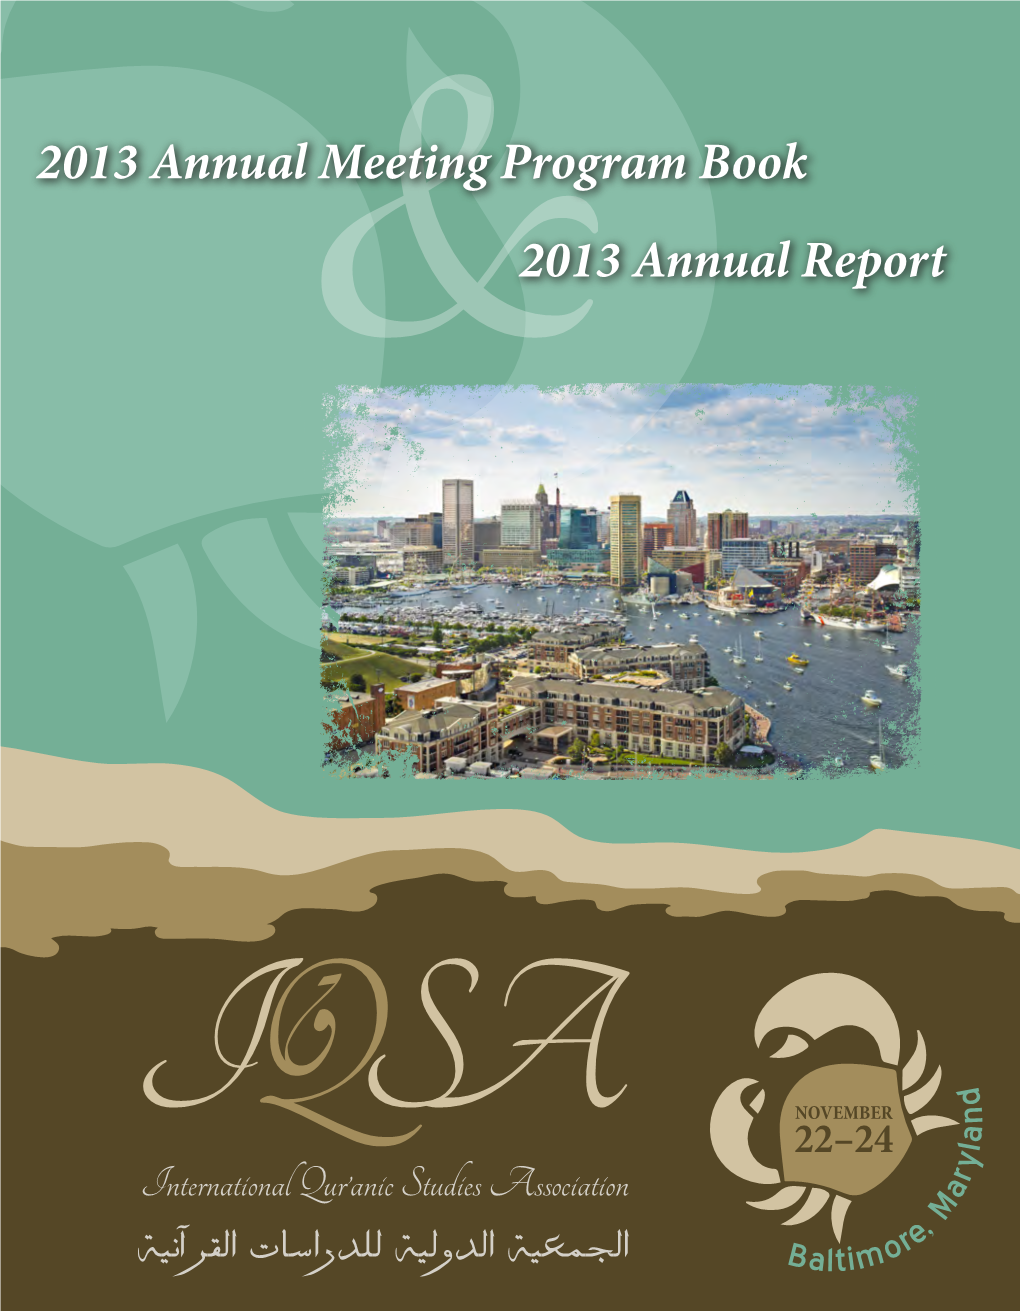 View the 2013 Annual Meeting PROGRAM BOOK